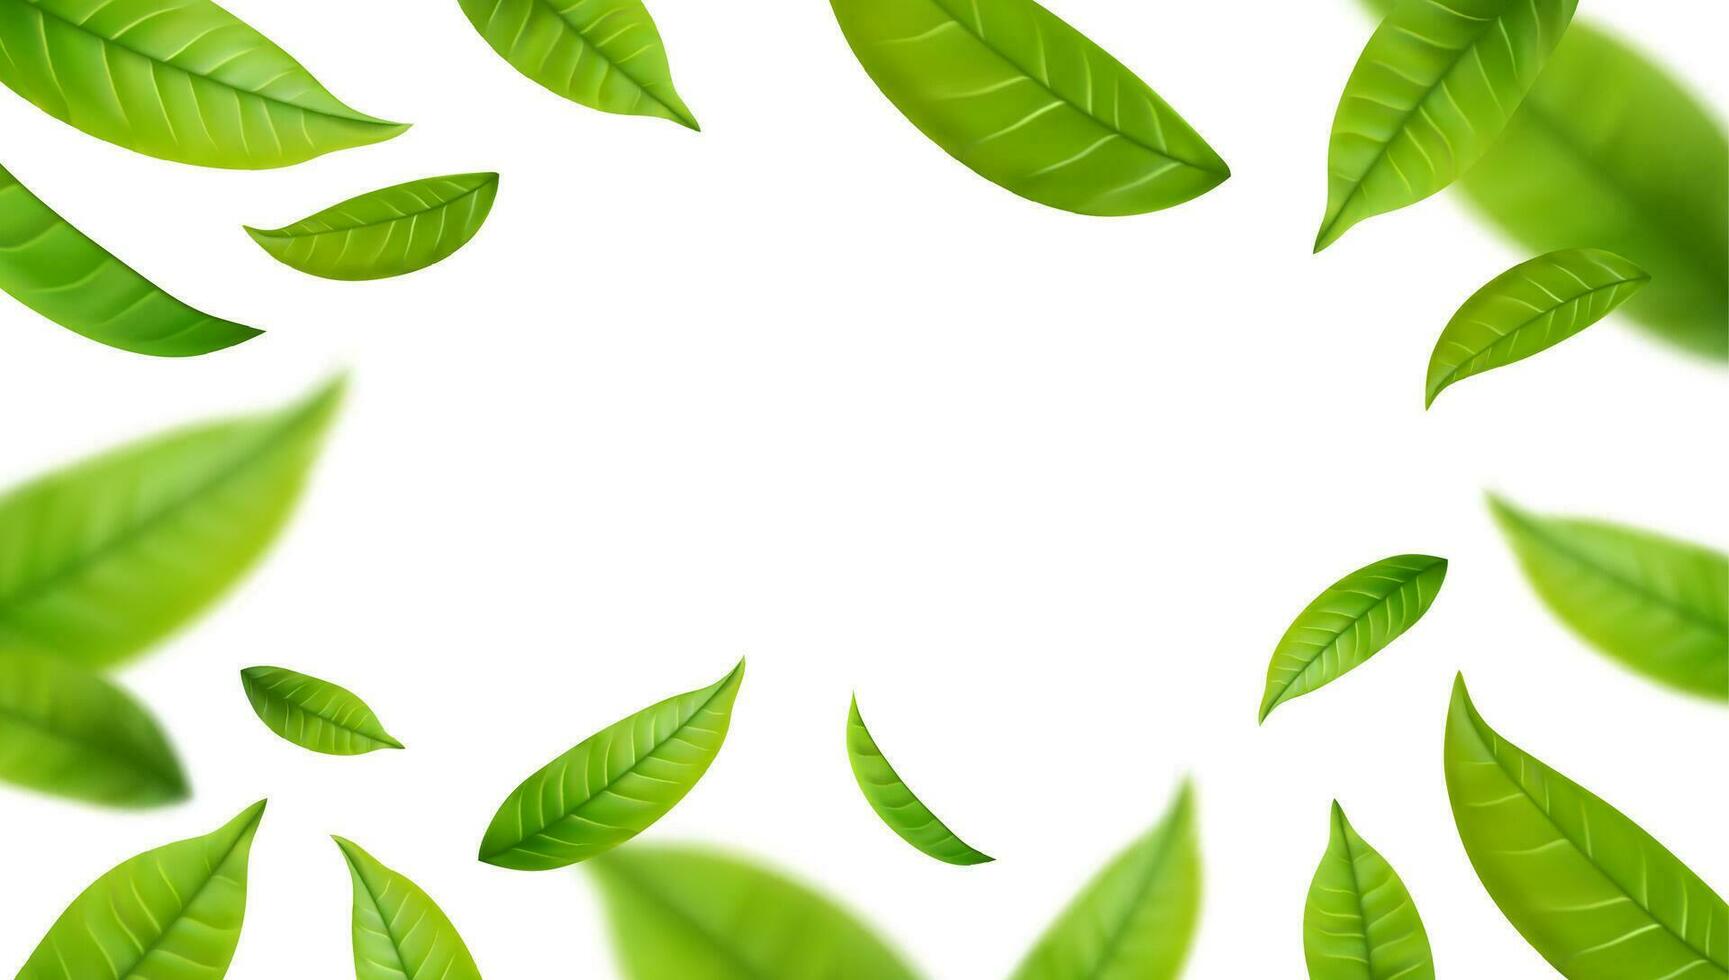 Realistic green tea leaves in motion vector